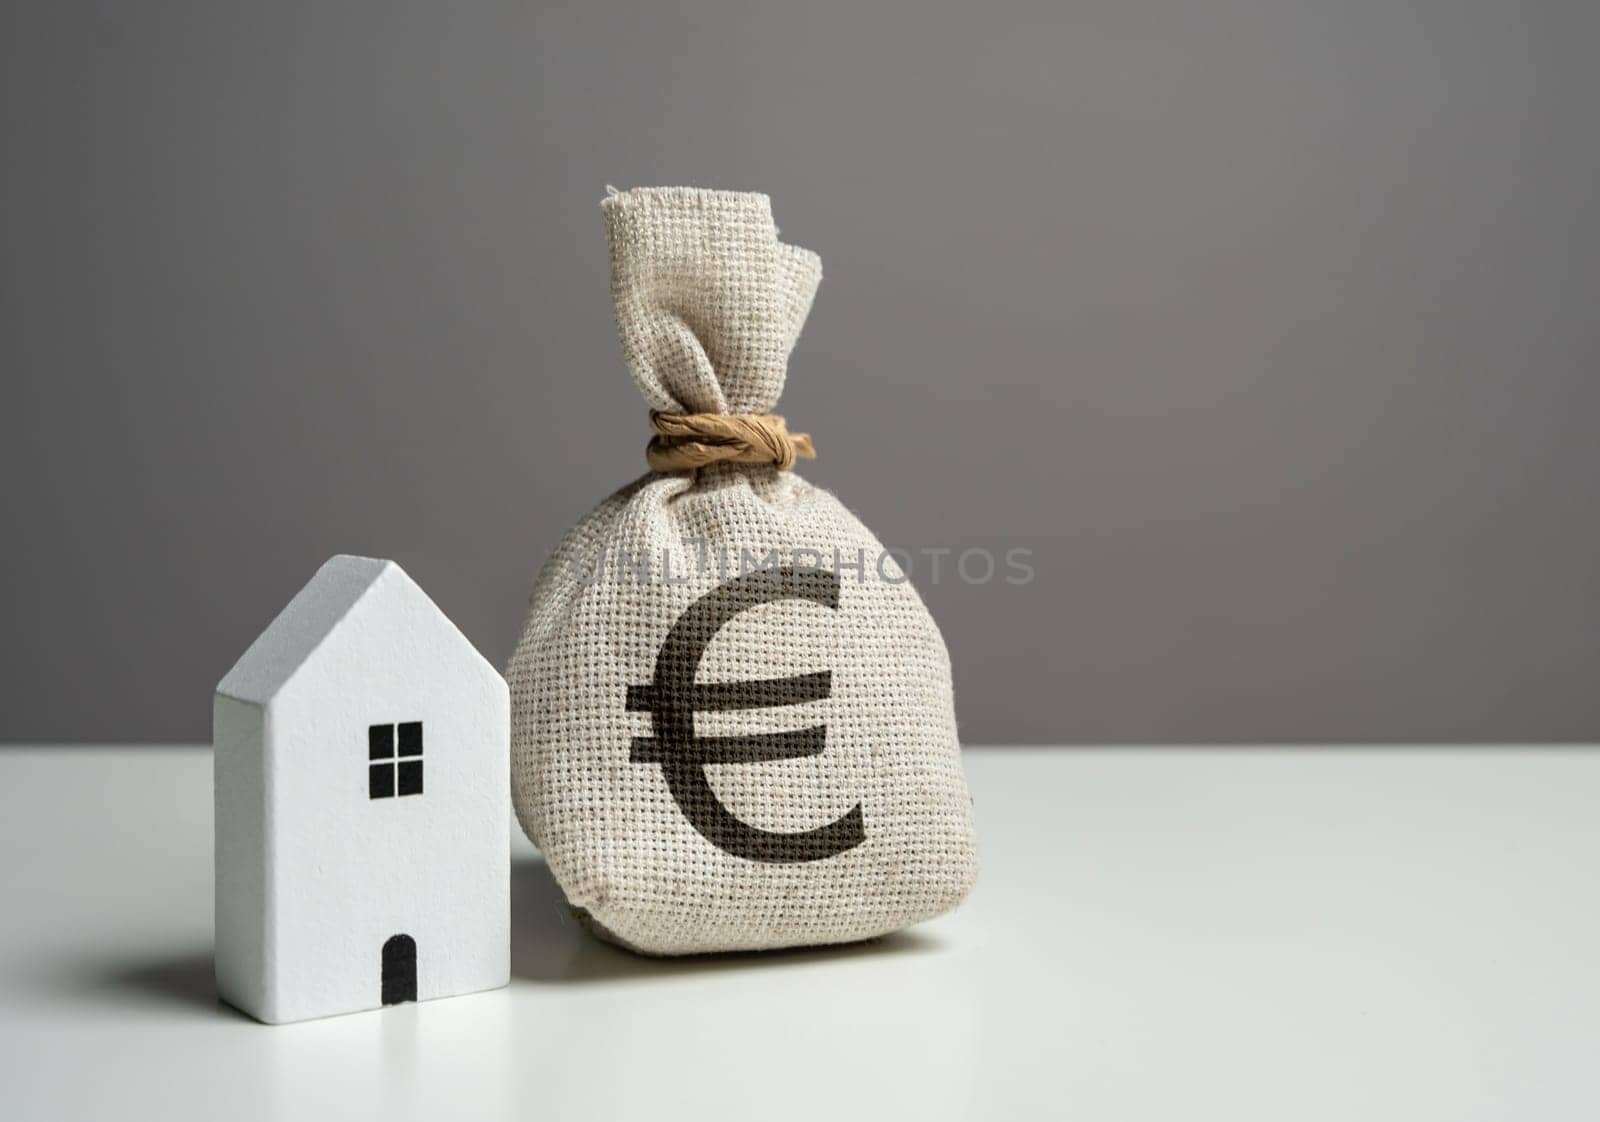 House and euro money bag. House price, property valuation. Investments in the purchase of real estate. Repair and service. Make a deal. Insurance by iLixe48